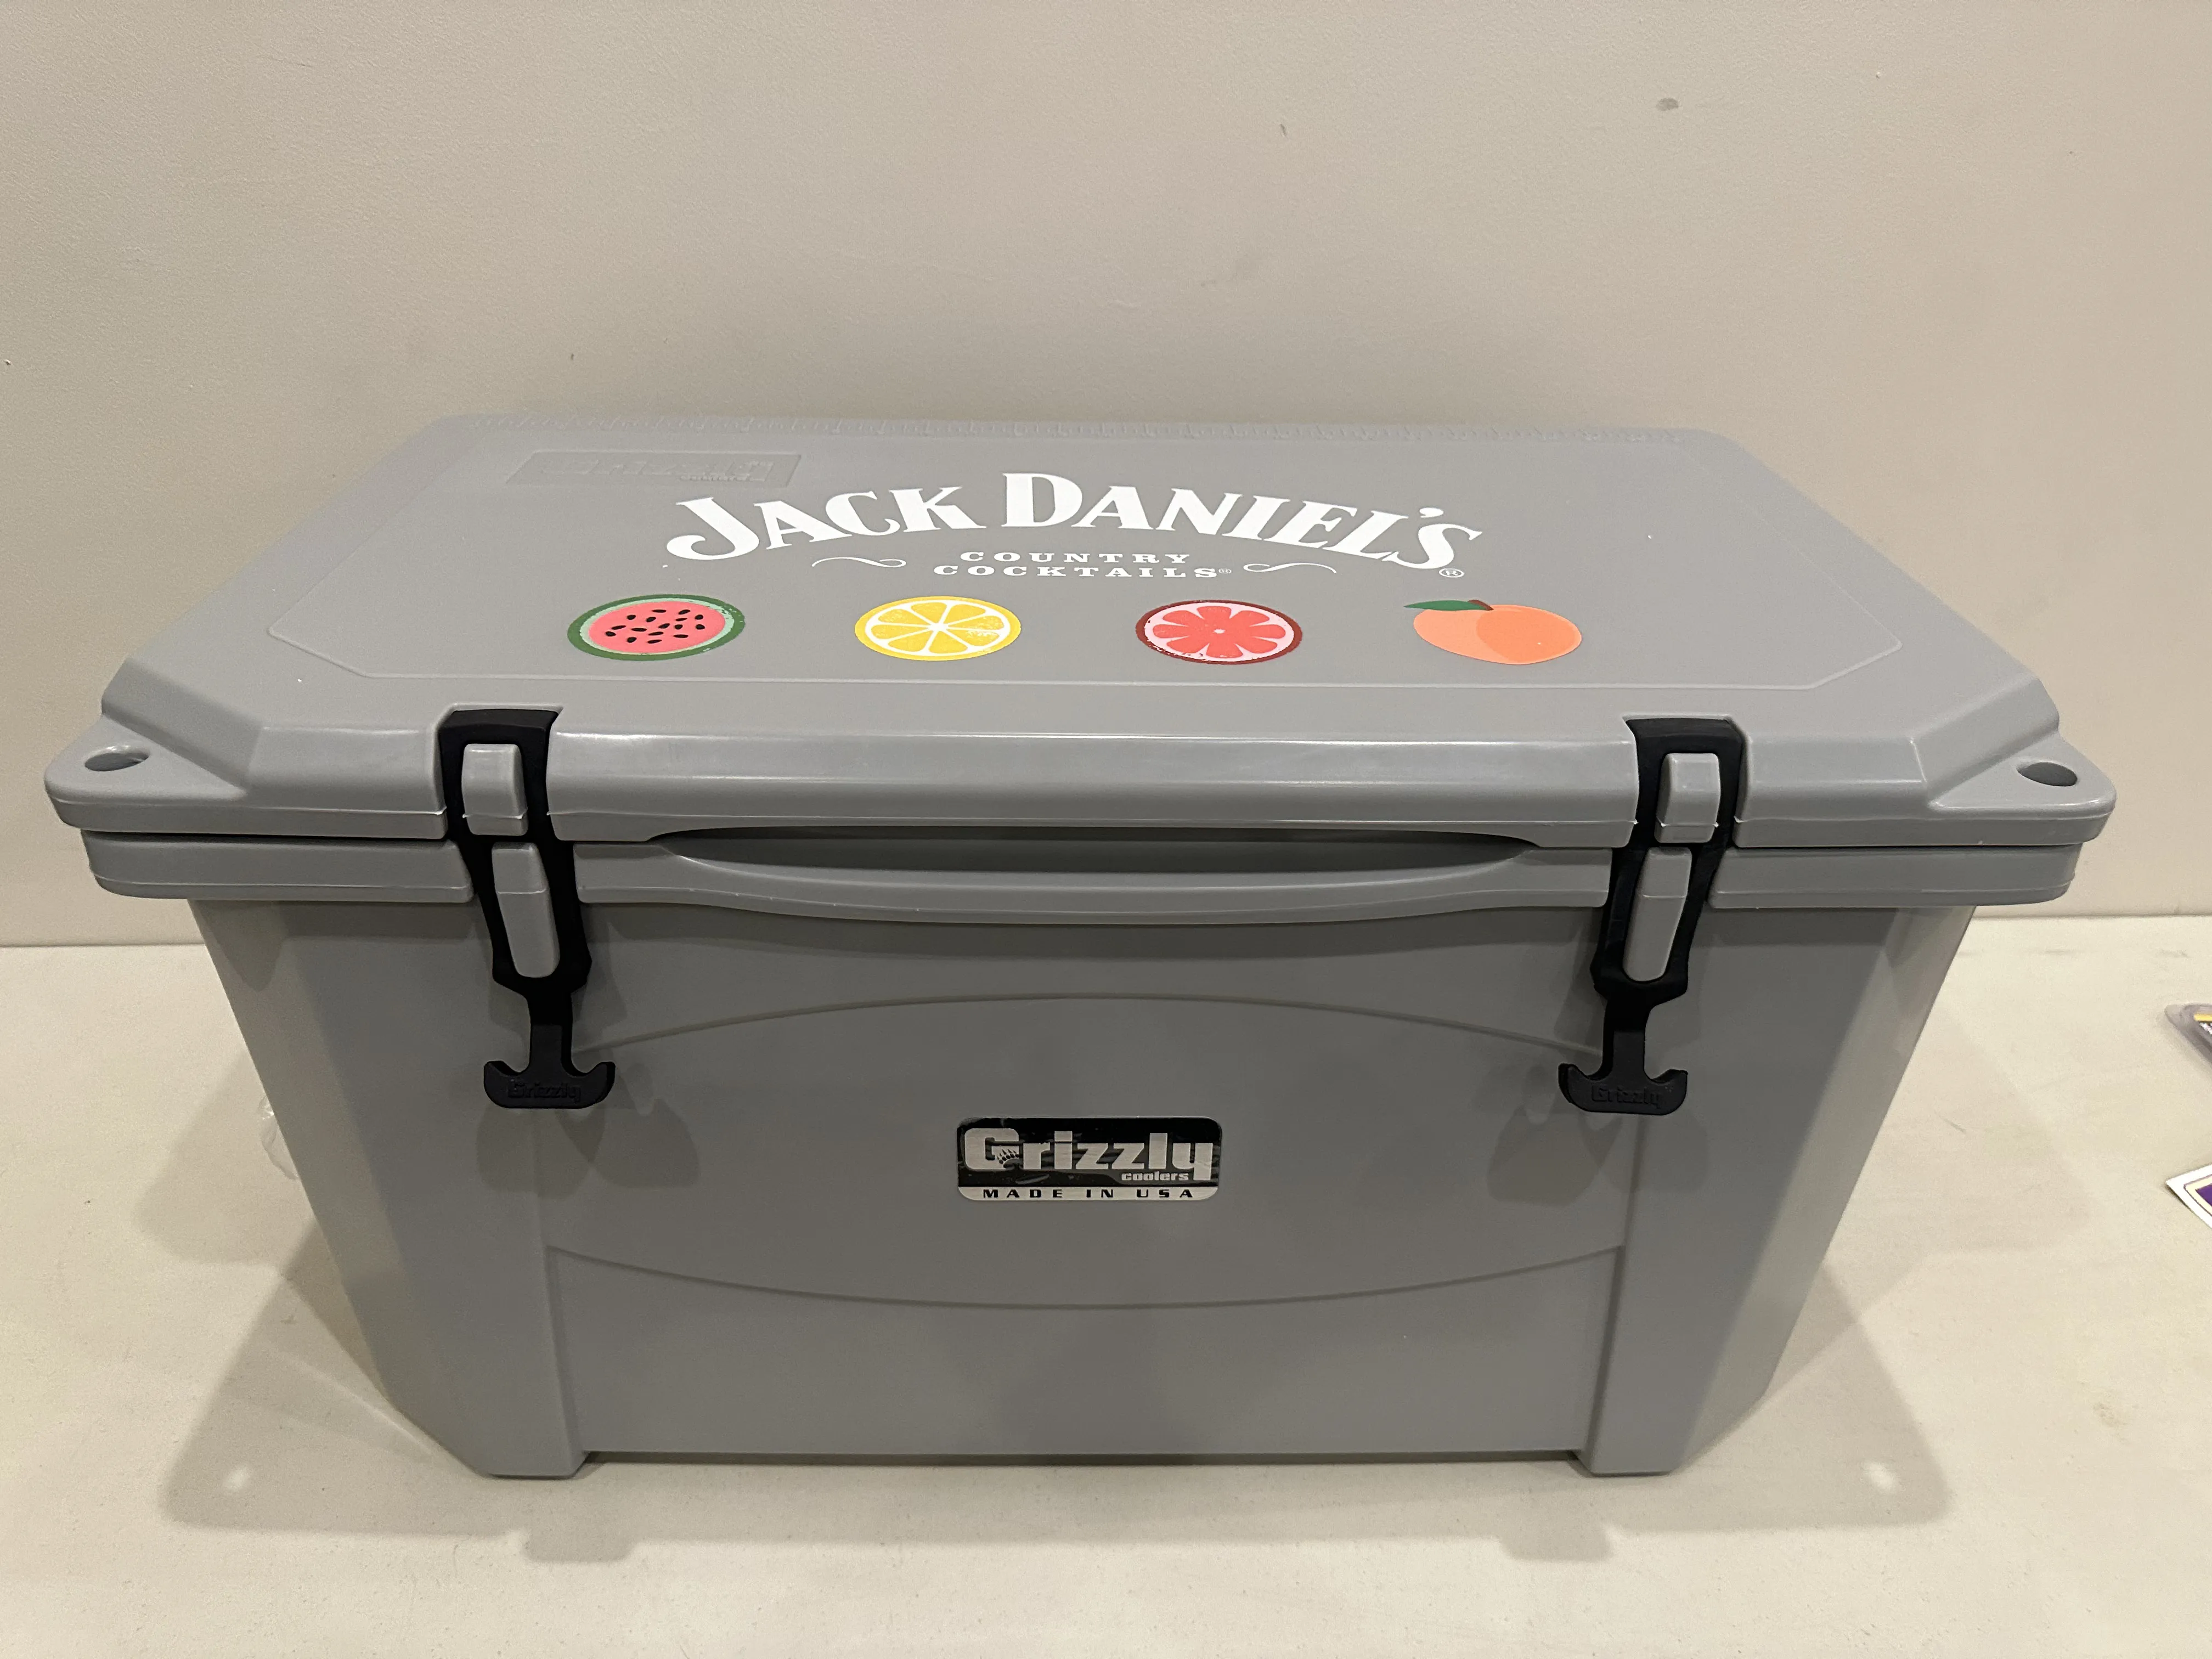 Jack Daniels Grizzly Cooler